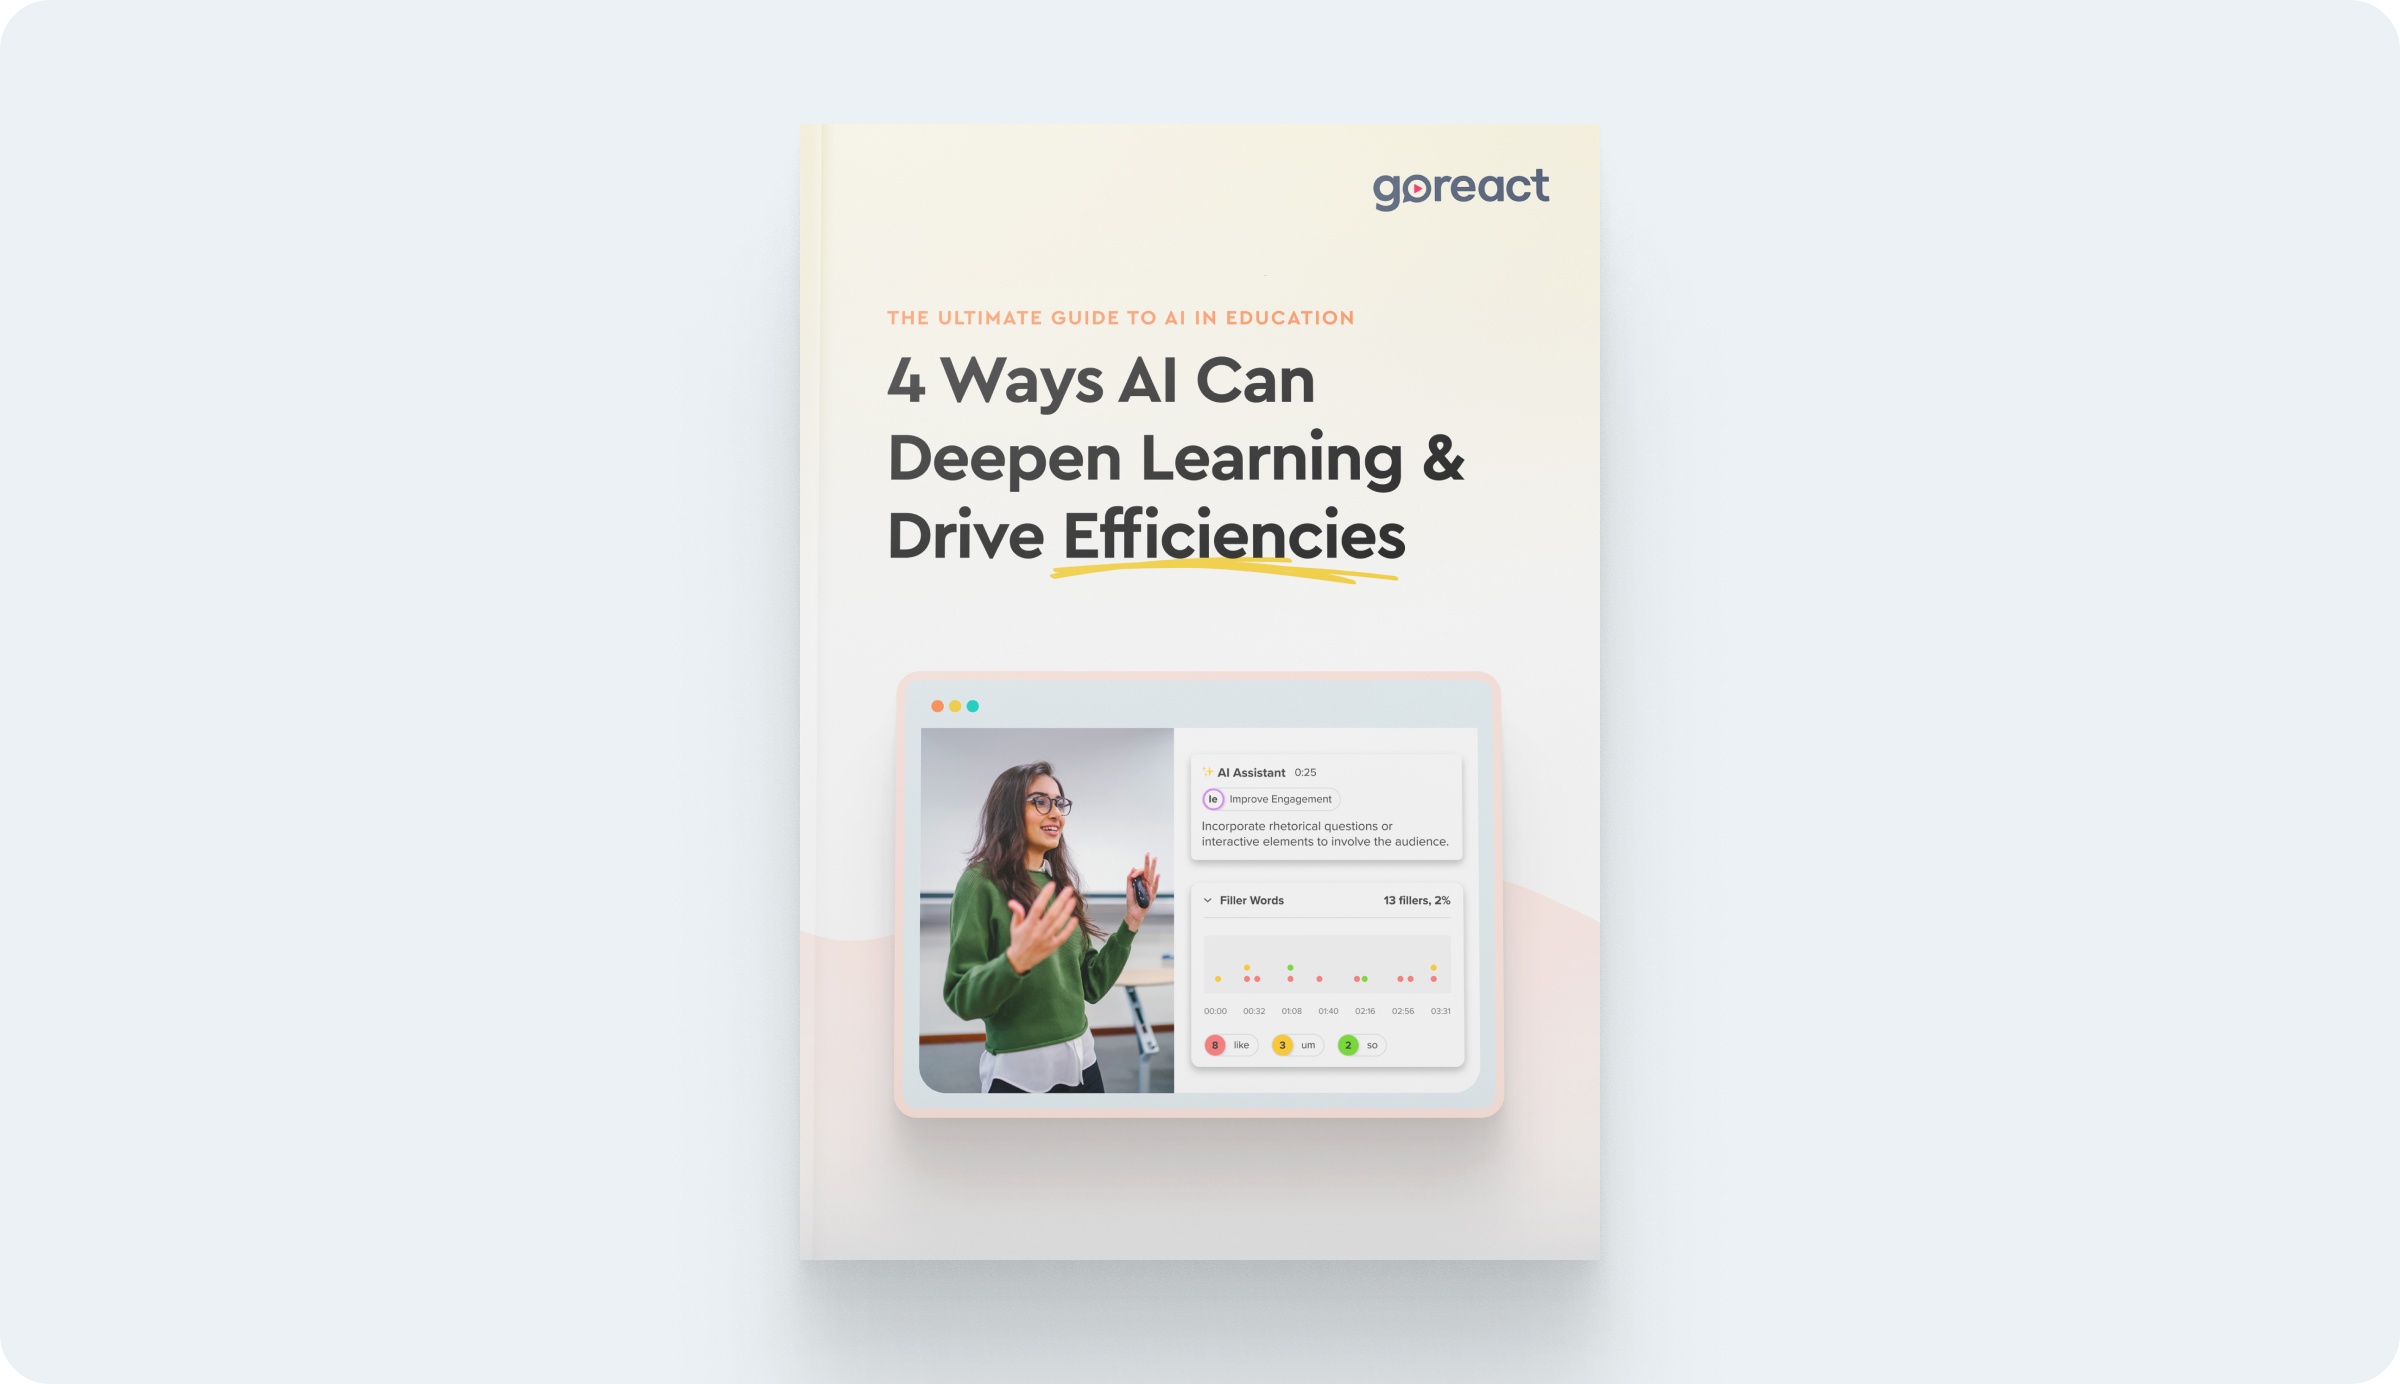 The Ultimate Guide to AI in Education: 4 Ways AI Can Deepen Learning and Drive Efficiencies